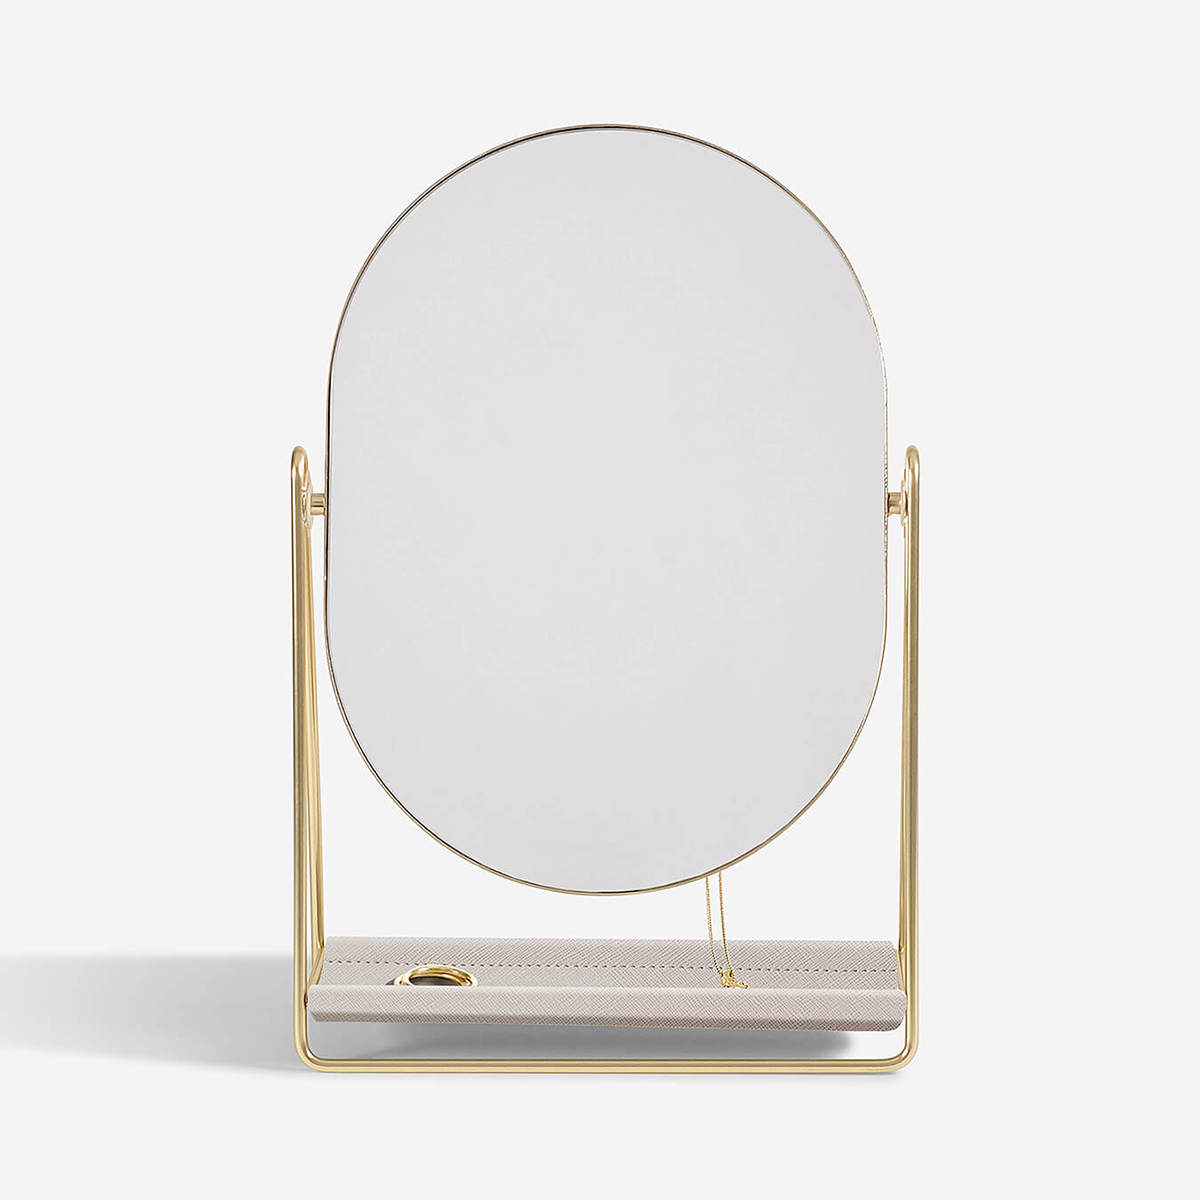 Stackers Mirror & Jewelry Stand Taupe/Brass